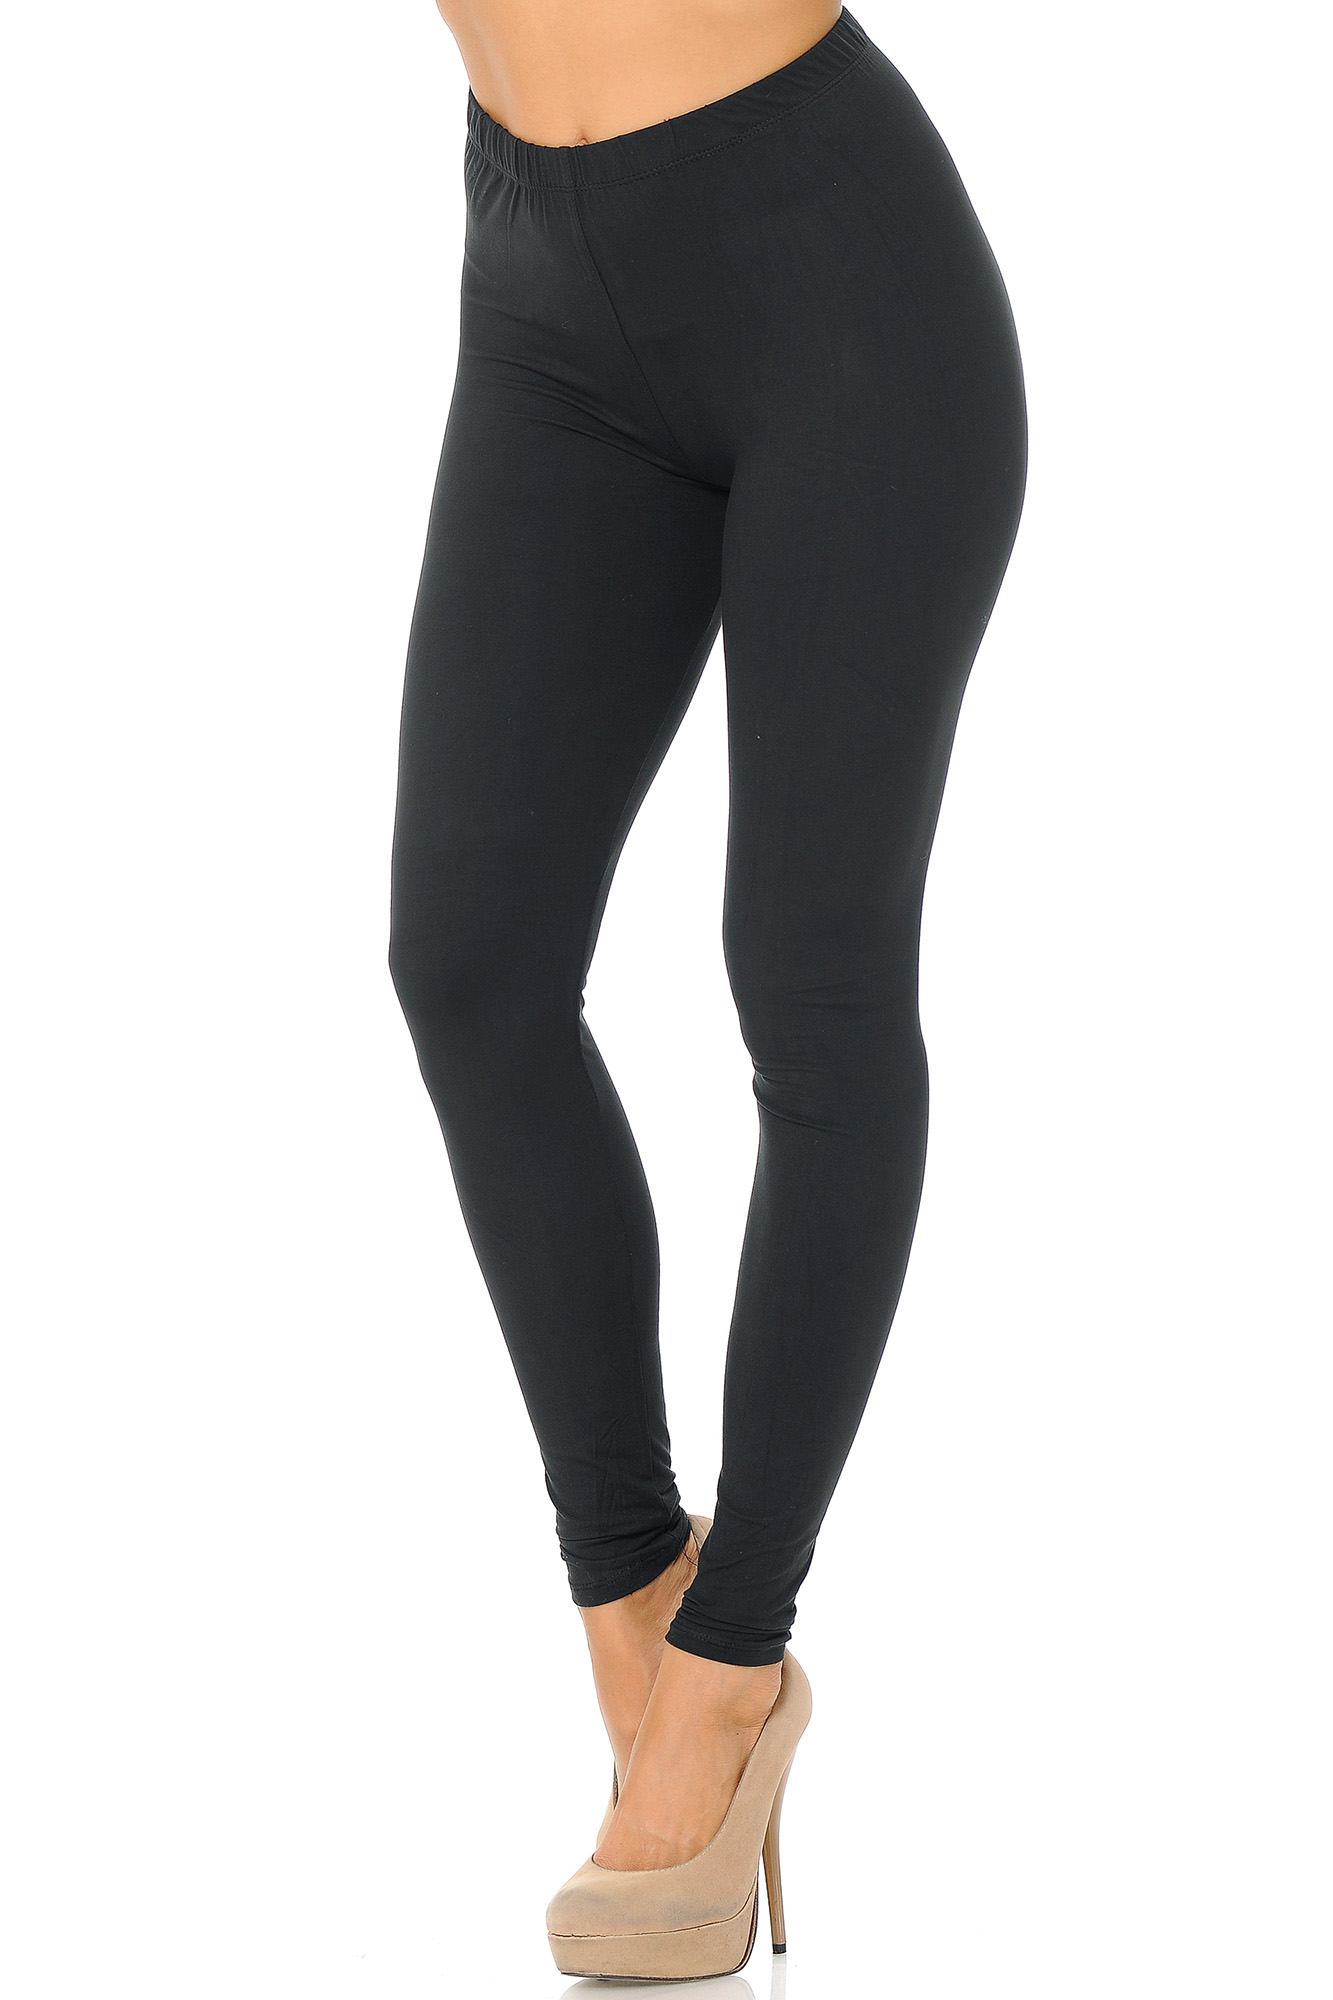 Buttery Soft Leggings Wholesale - China Fitness Clothing